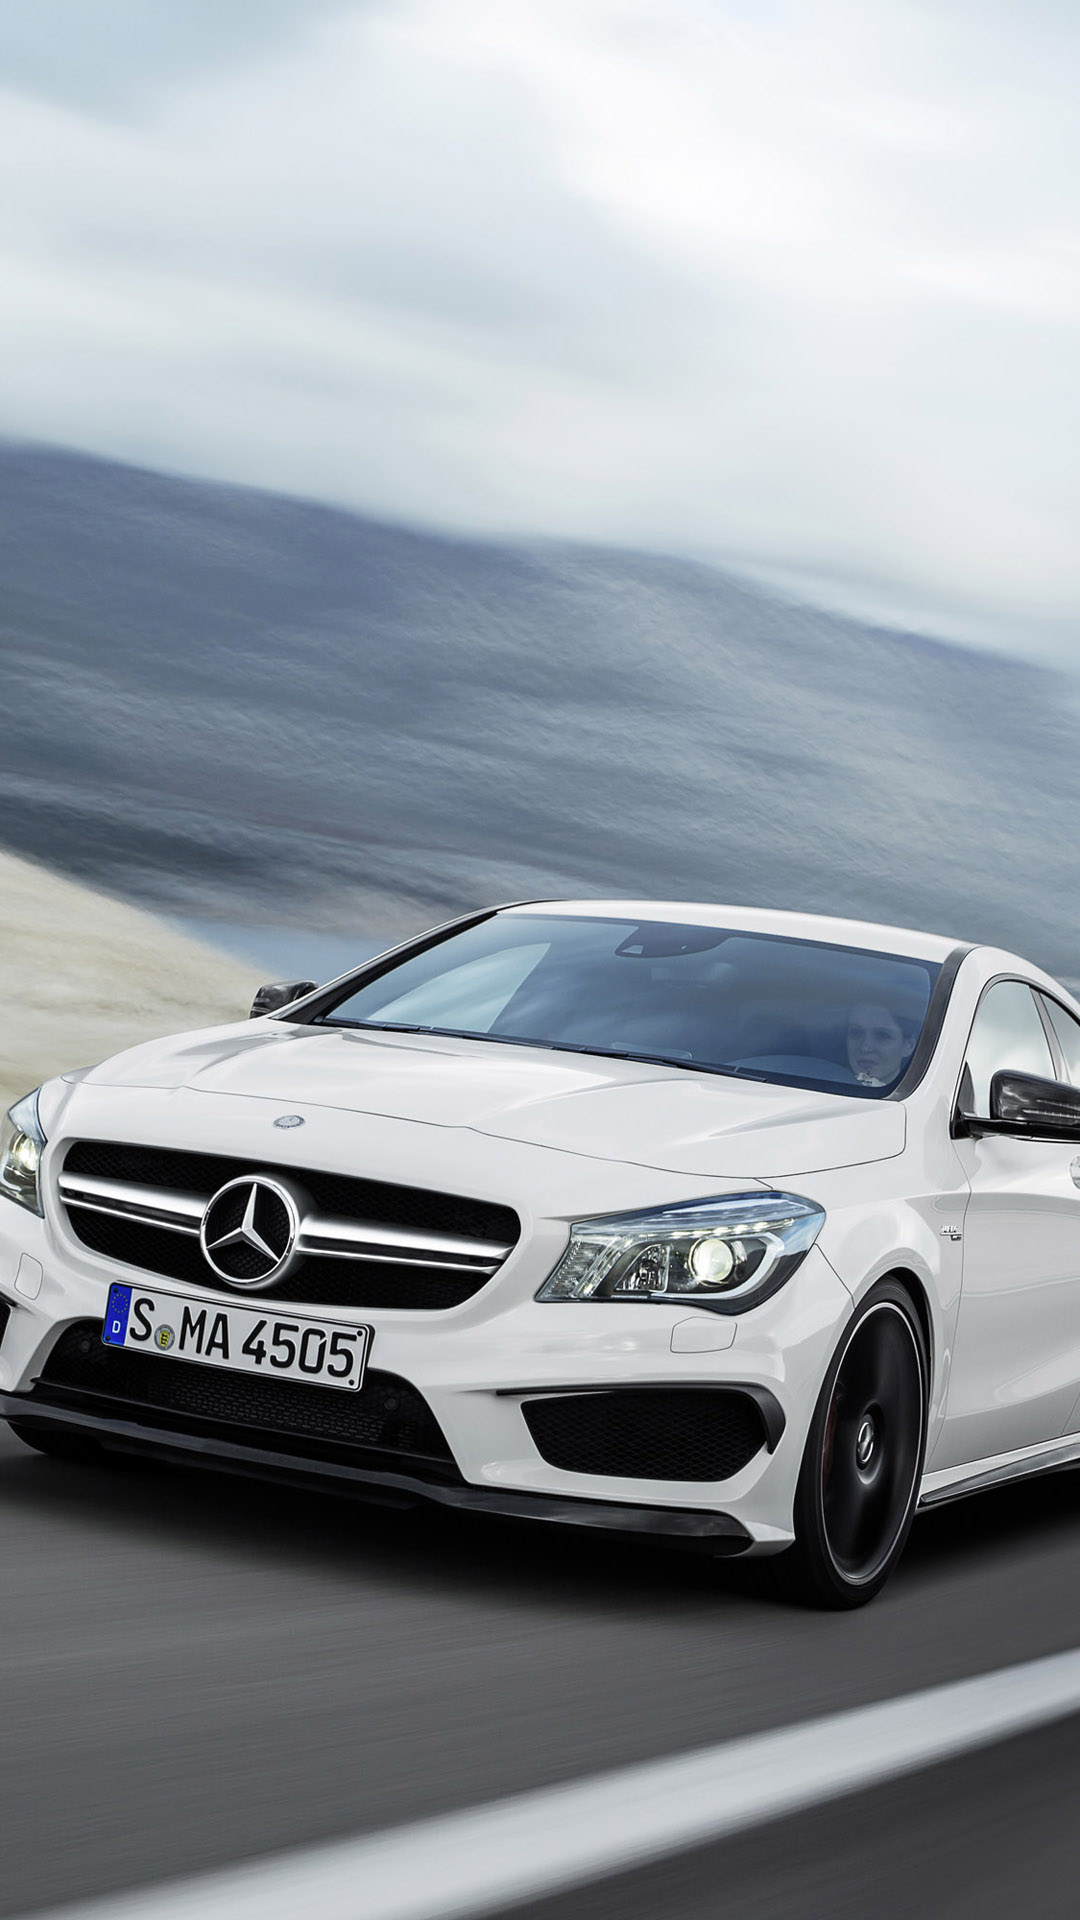 Mercedes Benz CLA 45 AMG   Best htc one wallpapers free and easy